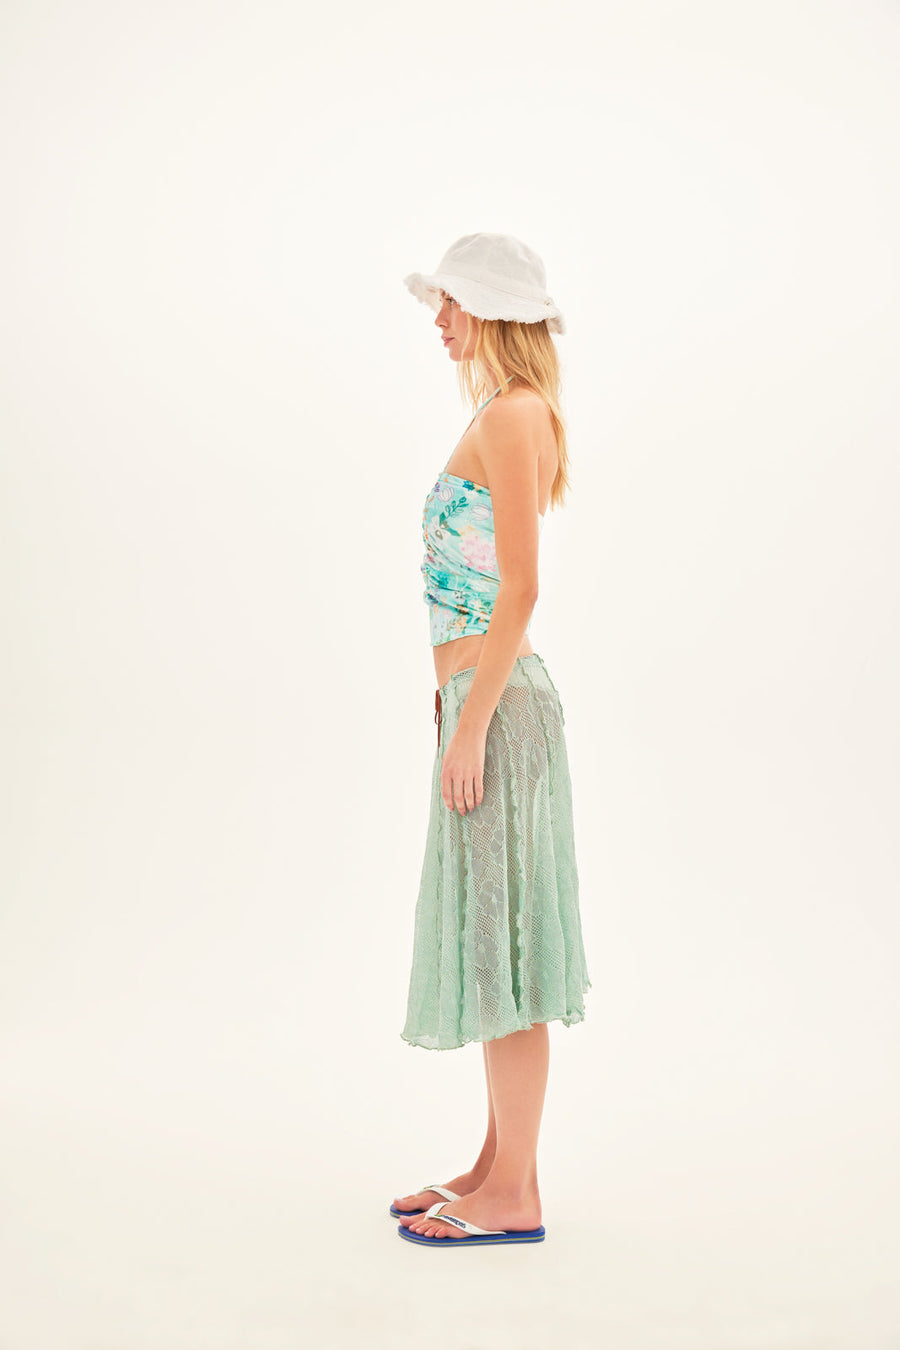 DAY - Cut-out strapless top with tie detail